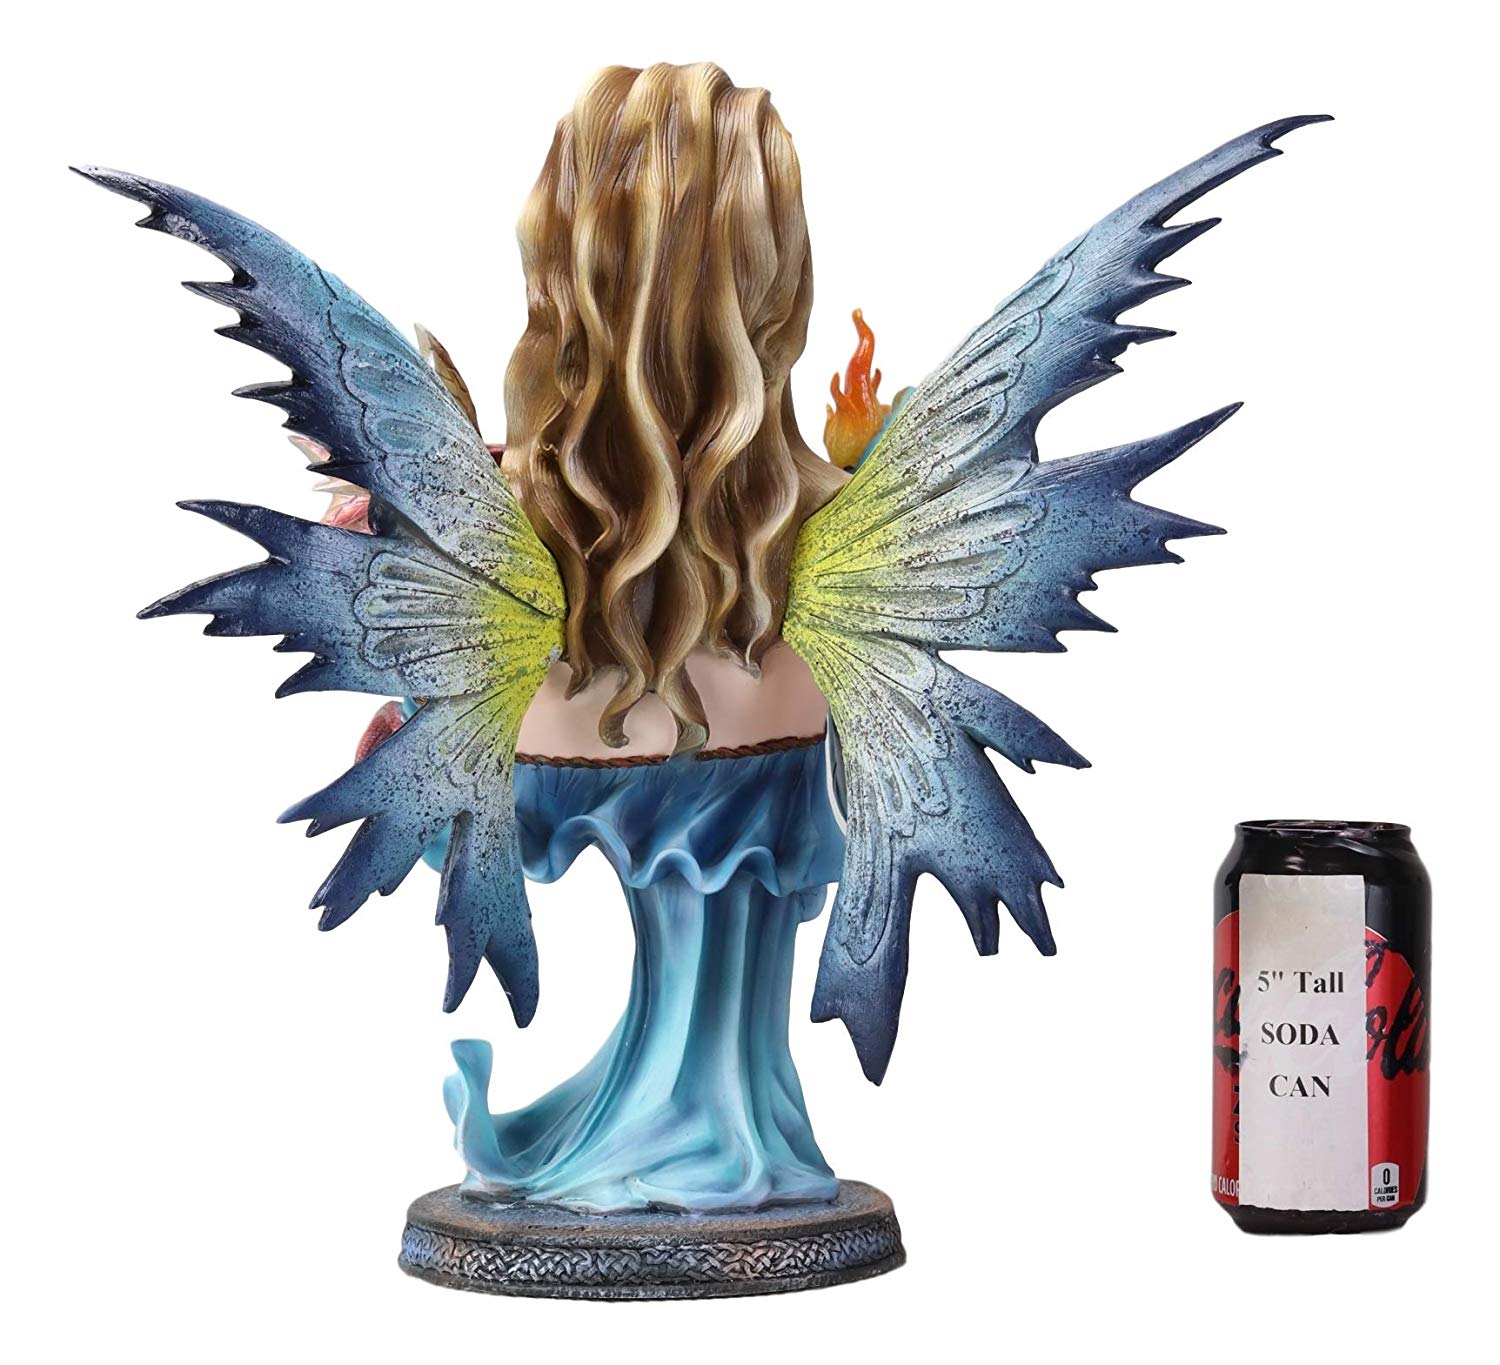 Large 14"H Fantasy Ice Elemental Fairy Controlling Ember With Red Dragon Statue - image 4 of 4